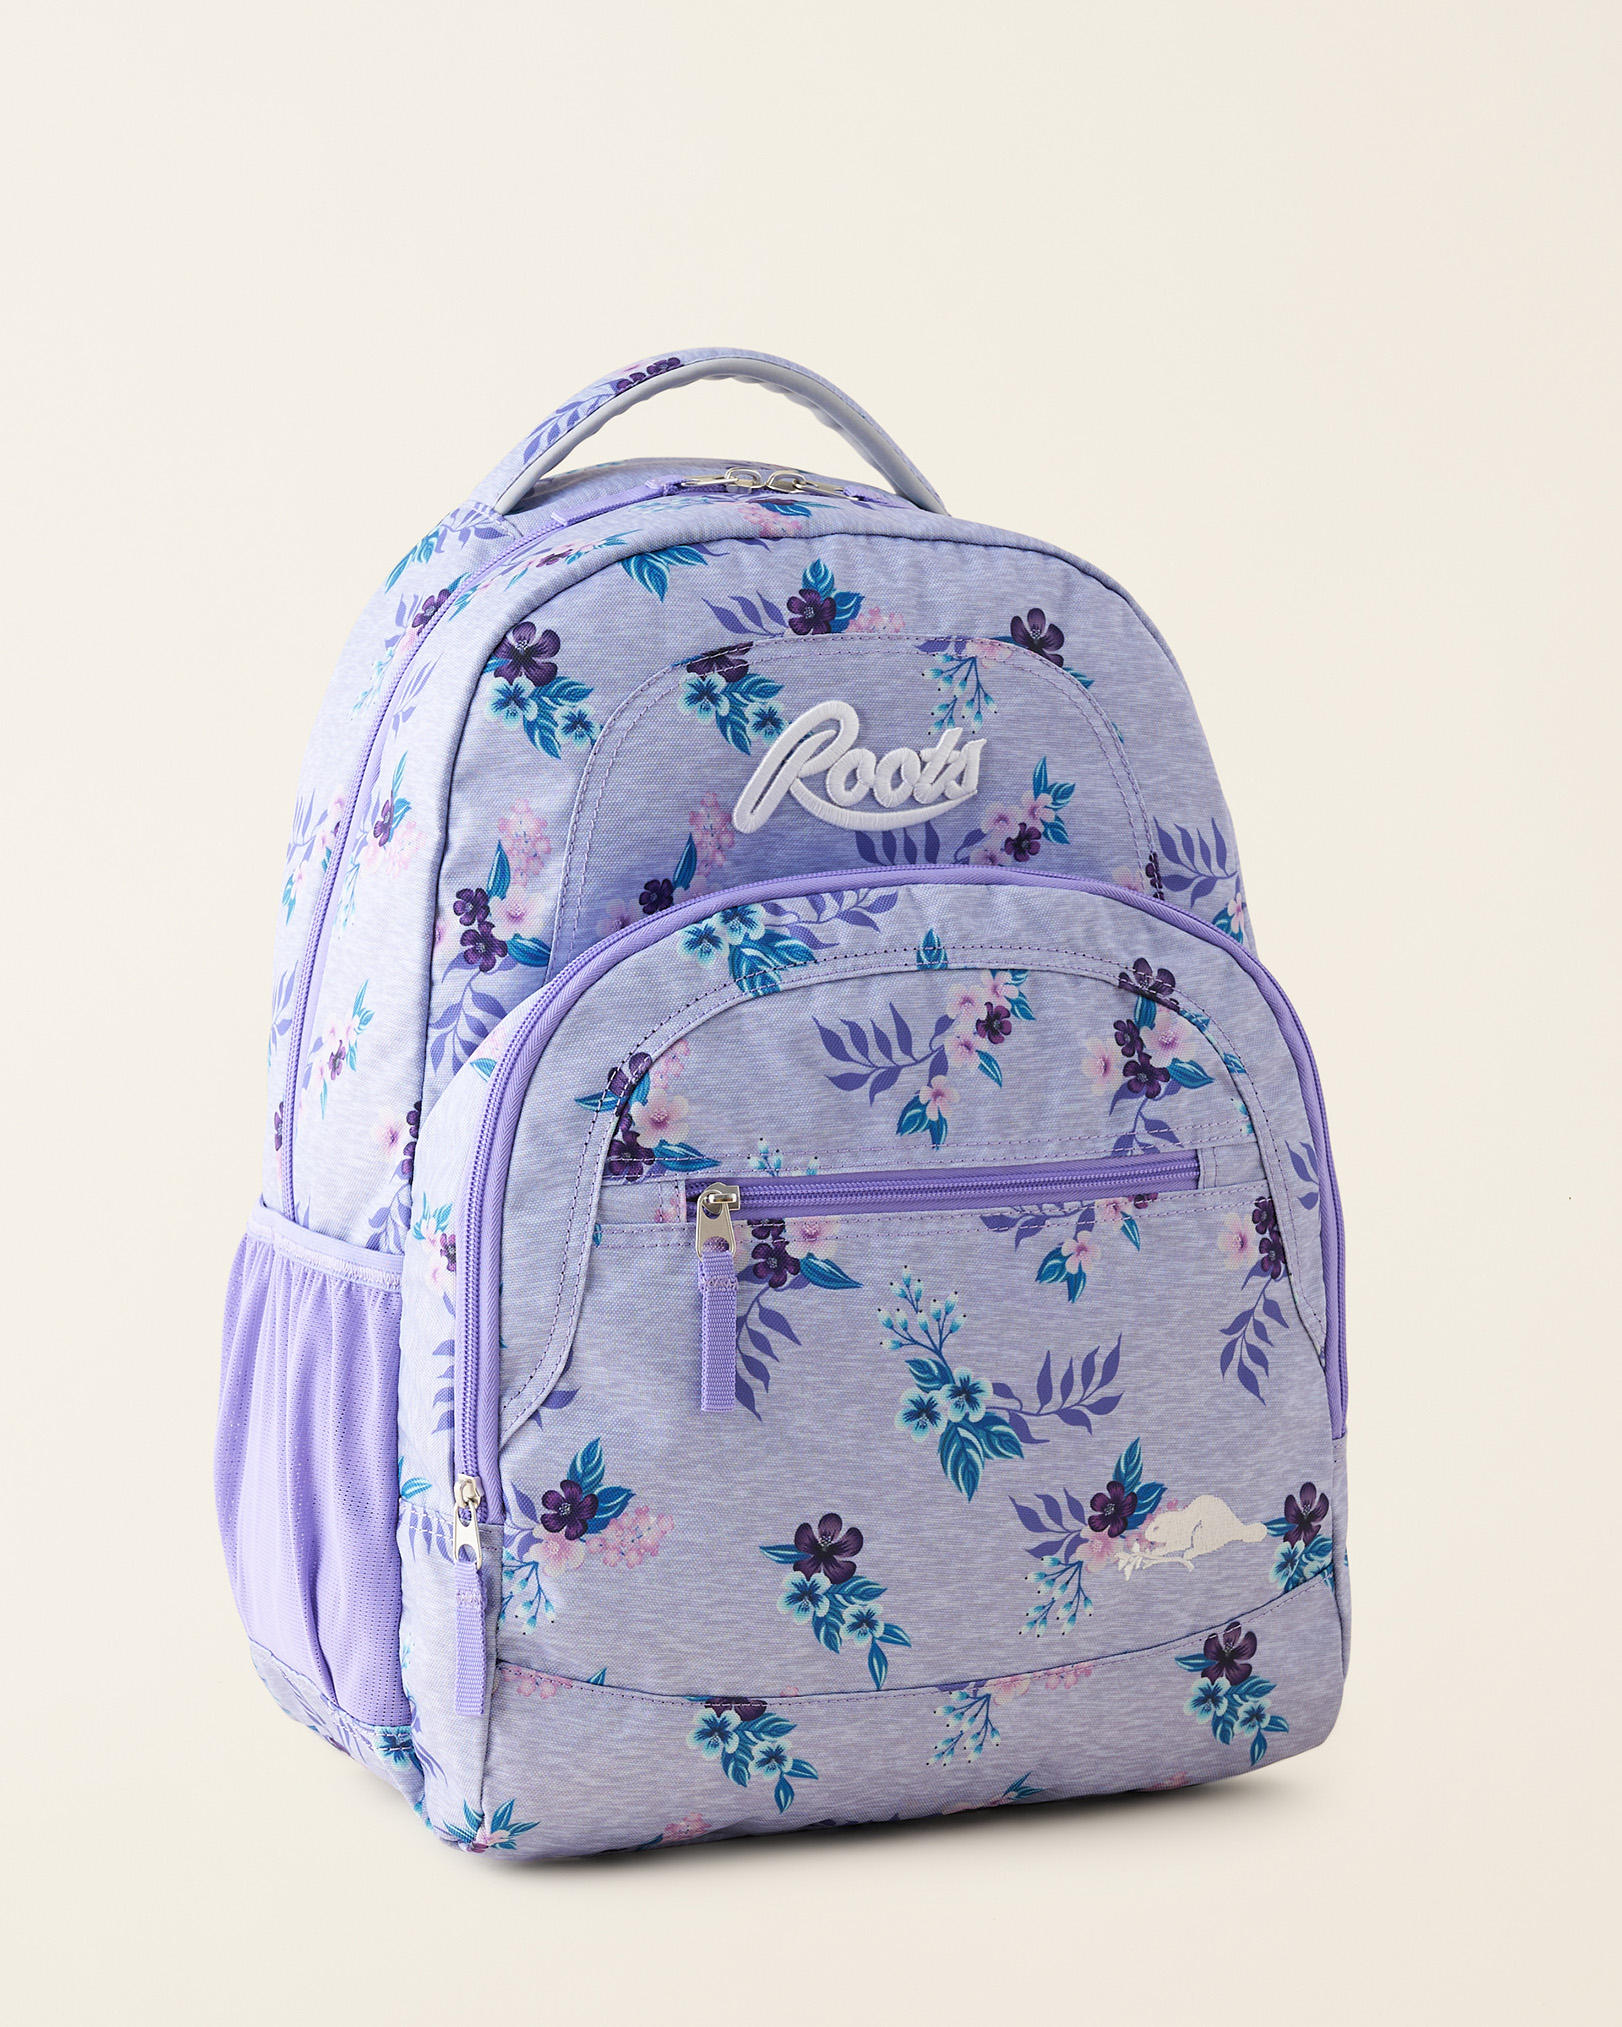 Roots Kids Backpack in Floral Lilac